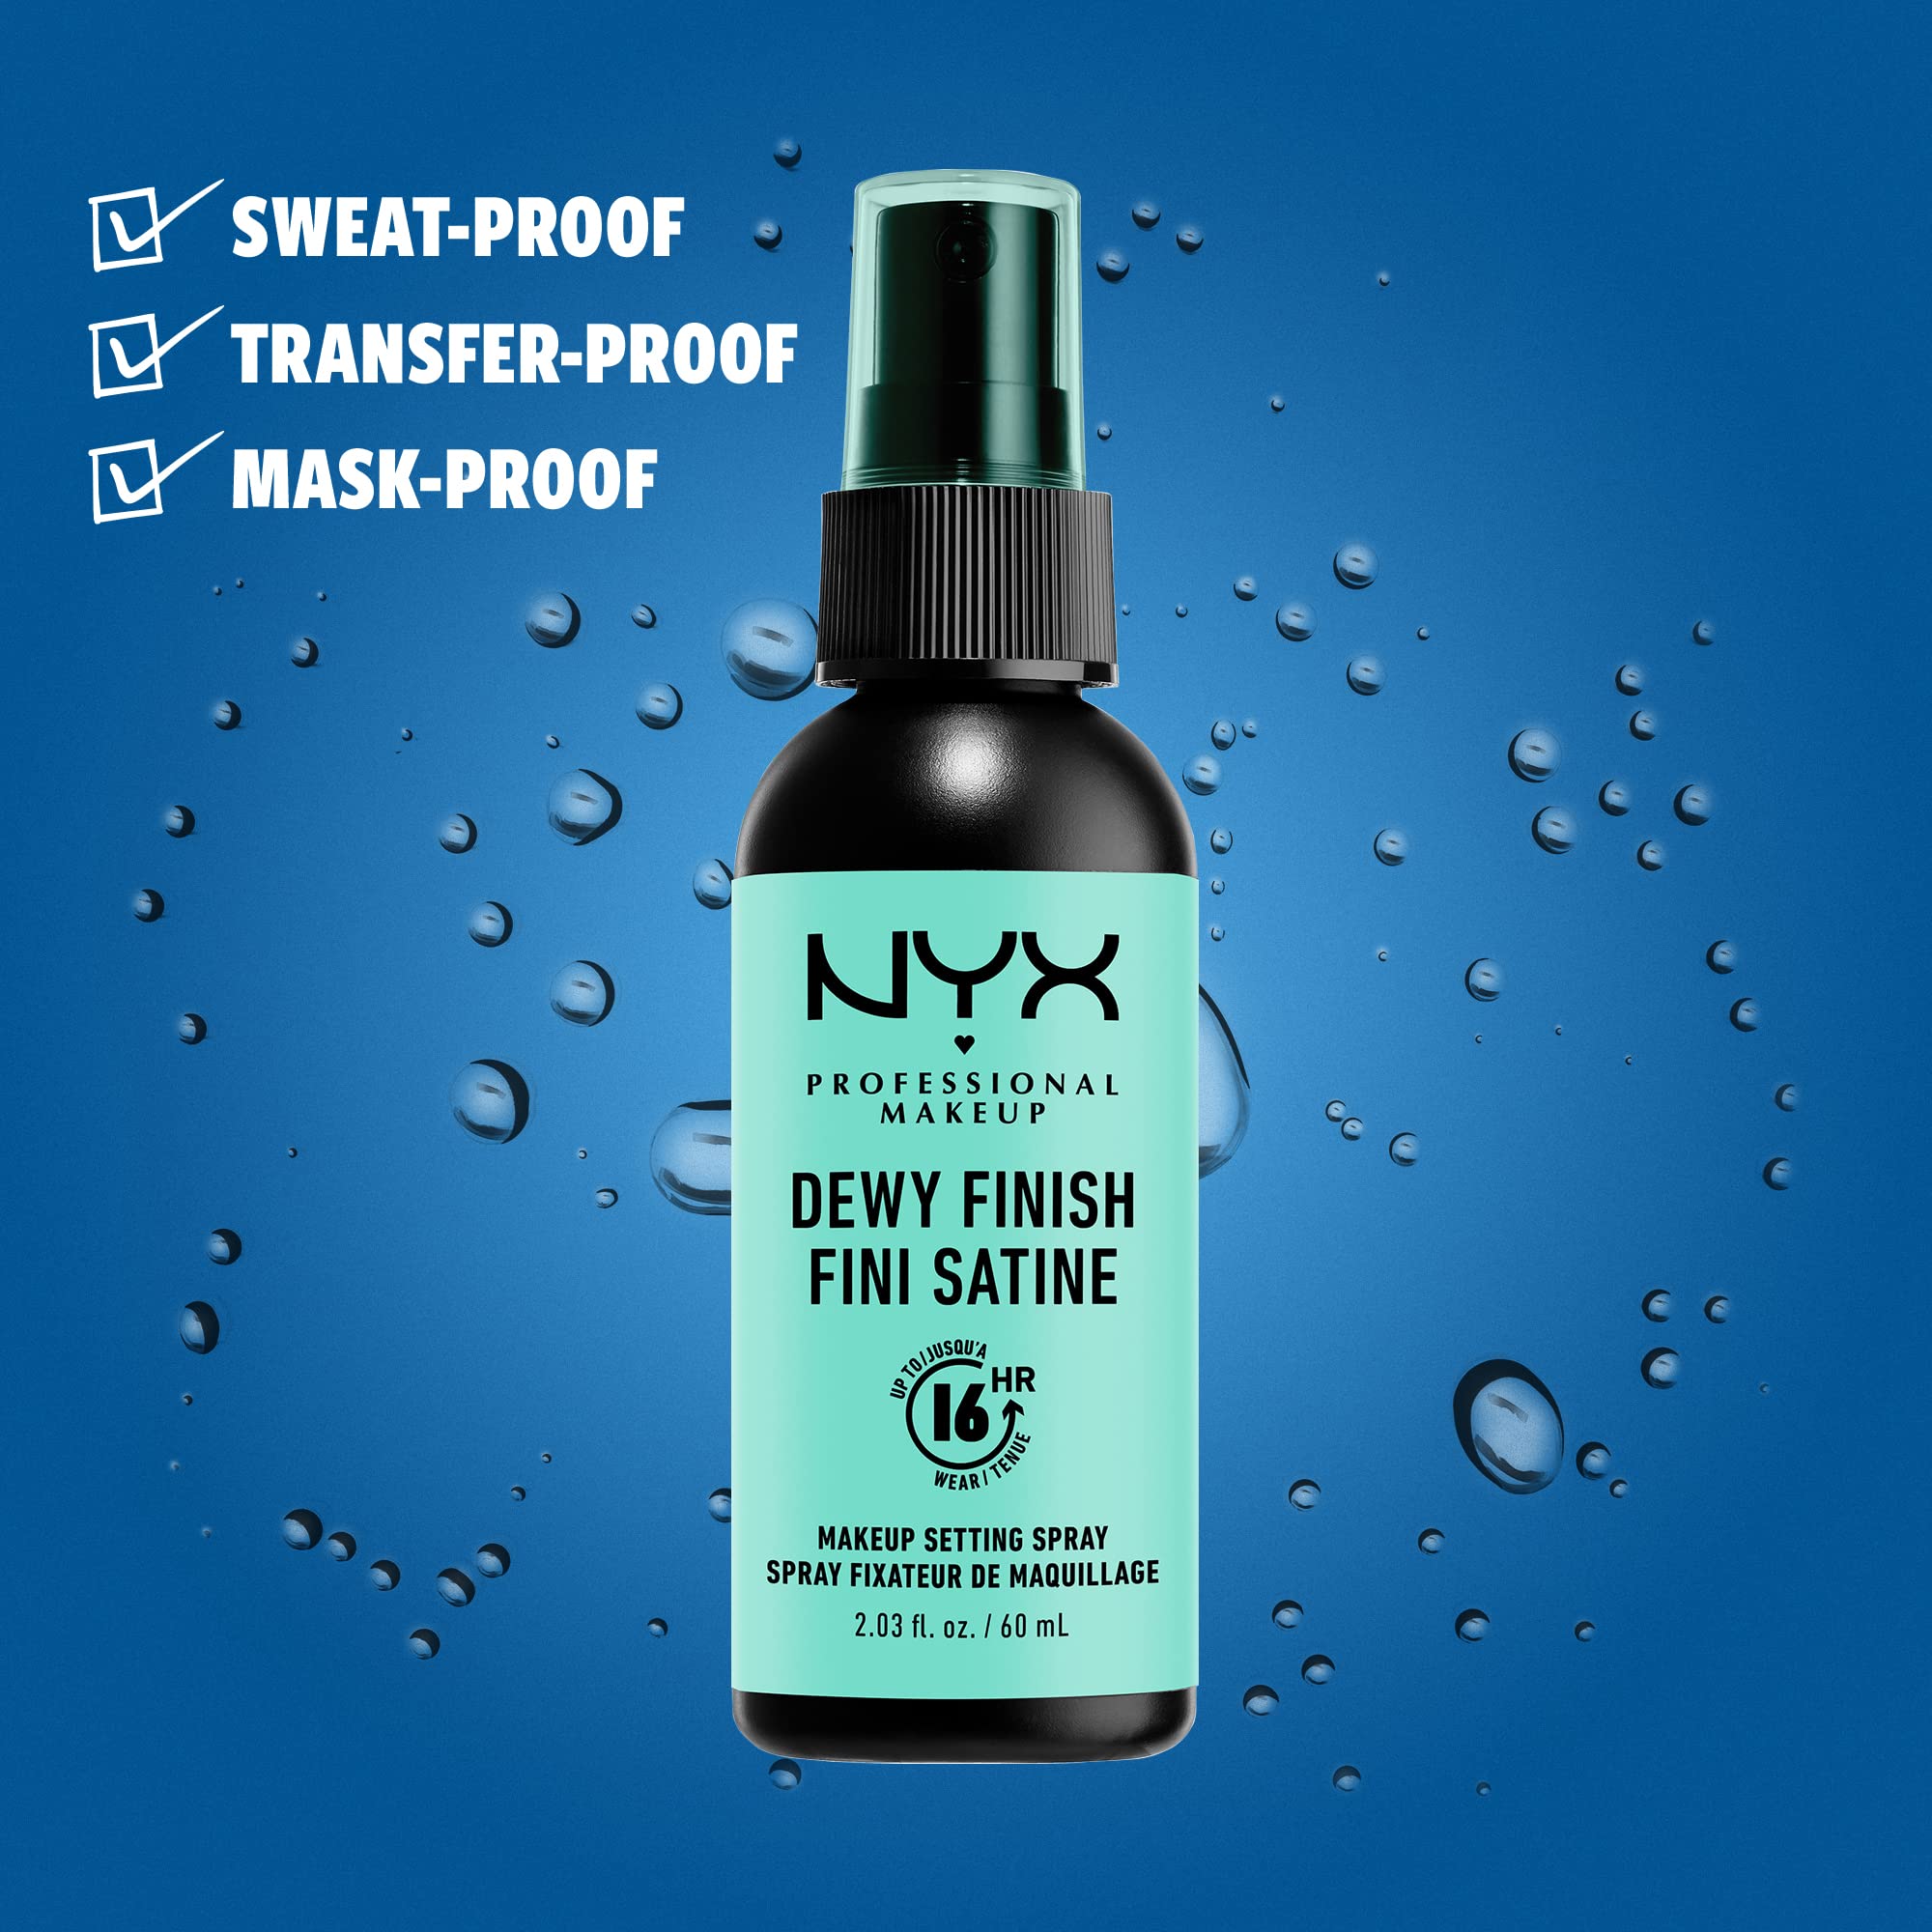 NYX PROFESSIONAL MAKEUP Make Up Setting Spray Dewy Finish, 2.03 Fl Oz (Pack of 1)